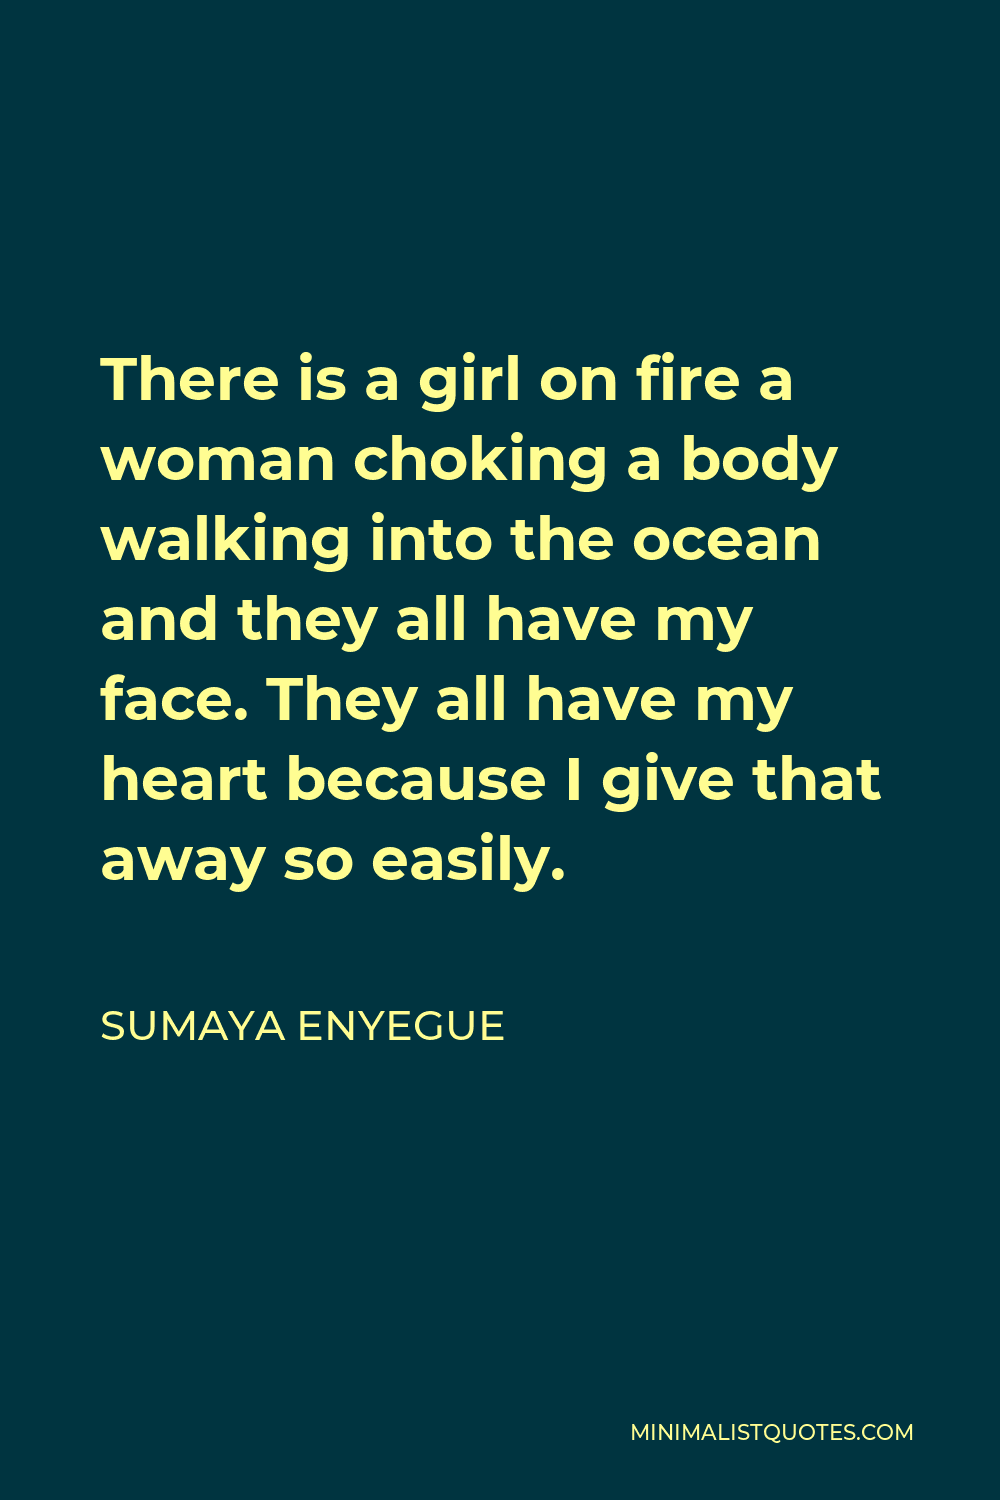 Sumaya Enyegue Quote - There is a girl on fire a woman choking a body walking into the ocean and they all have my face. They all have my heart because I give that away so easily.